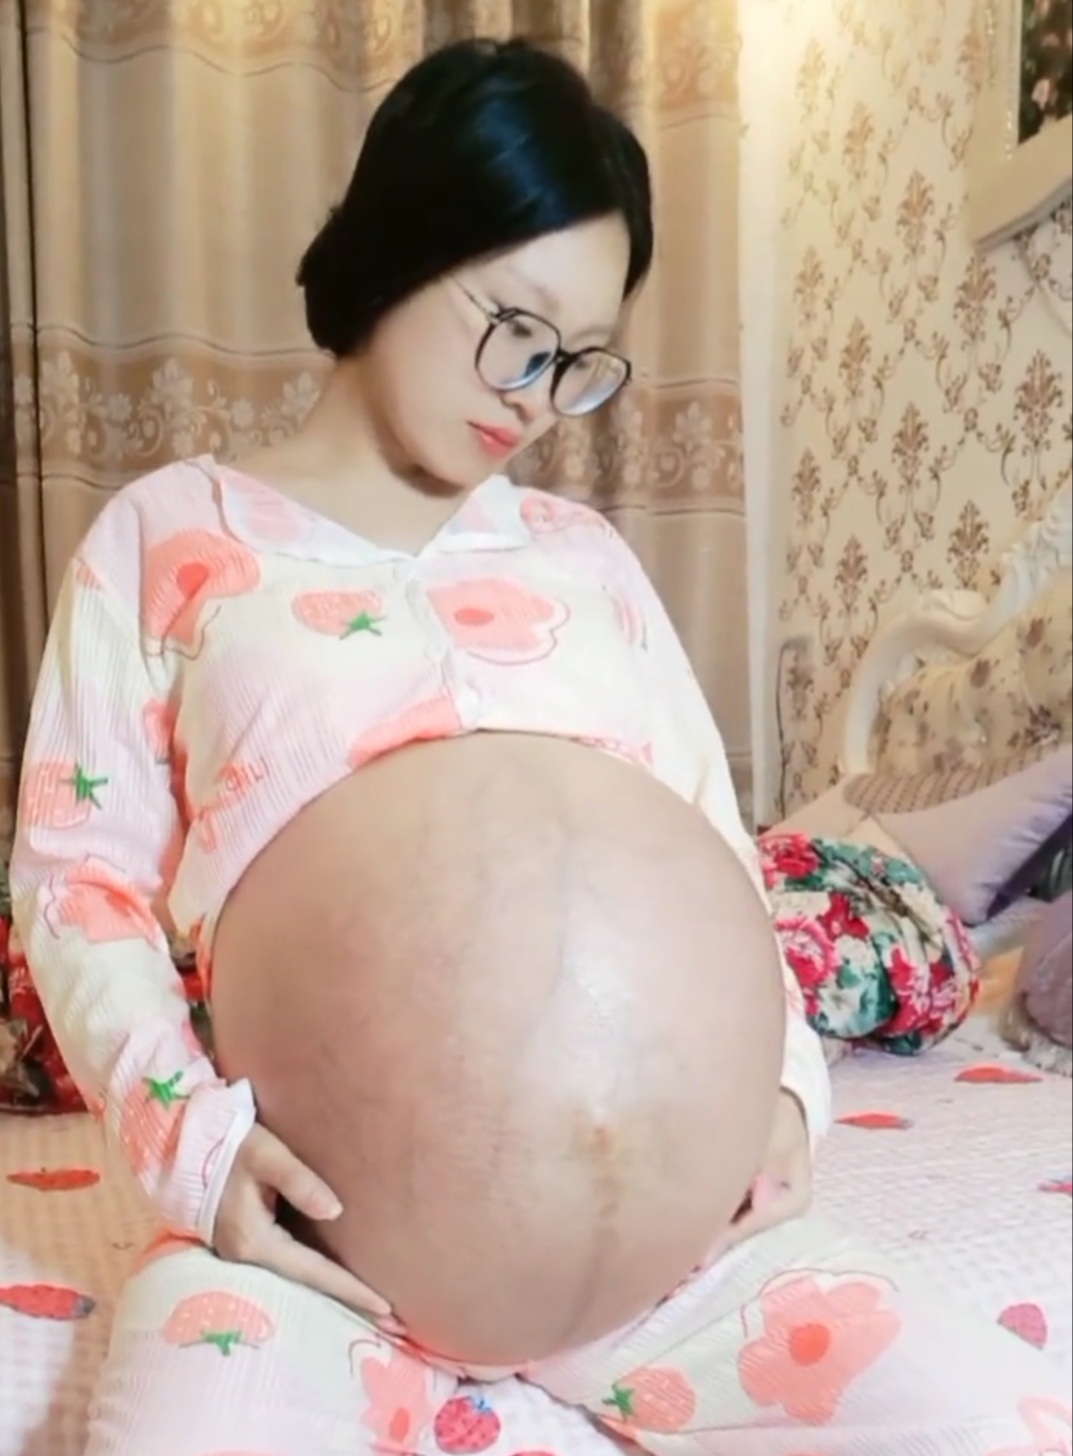 Big pregnant belly - video 3